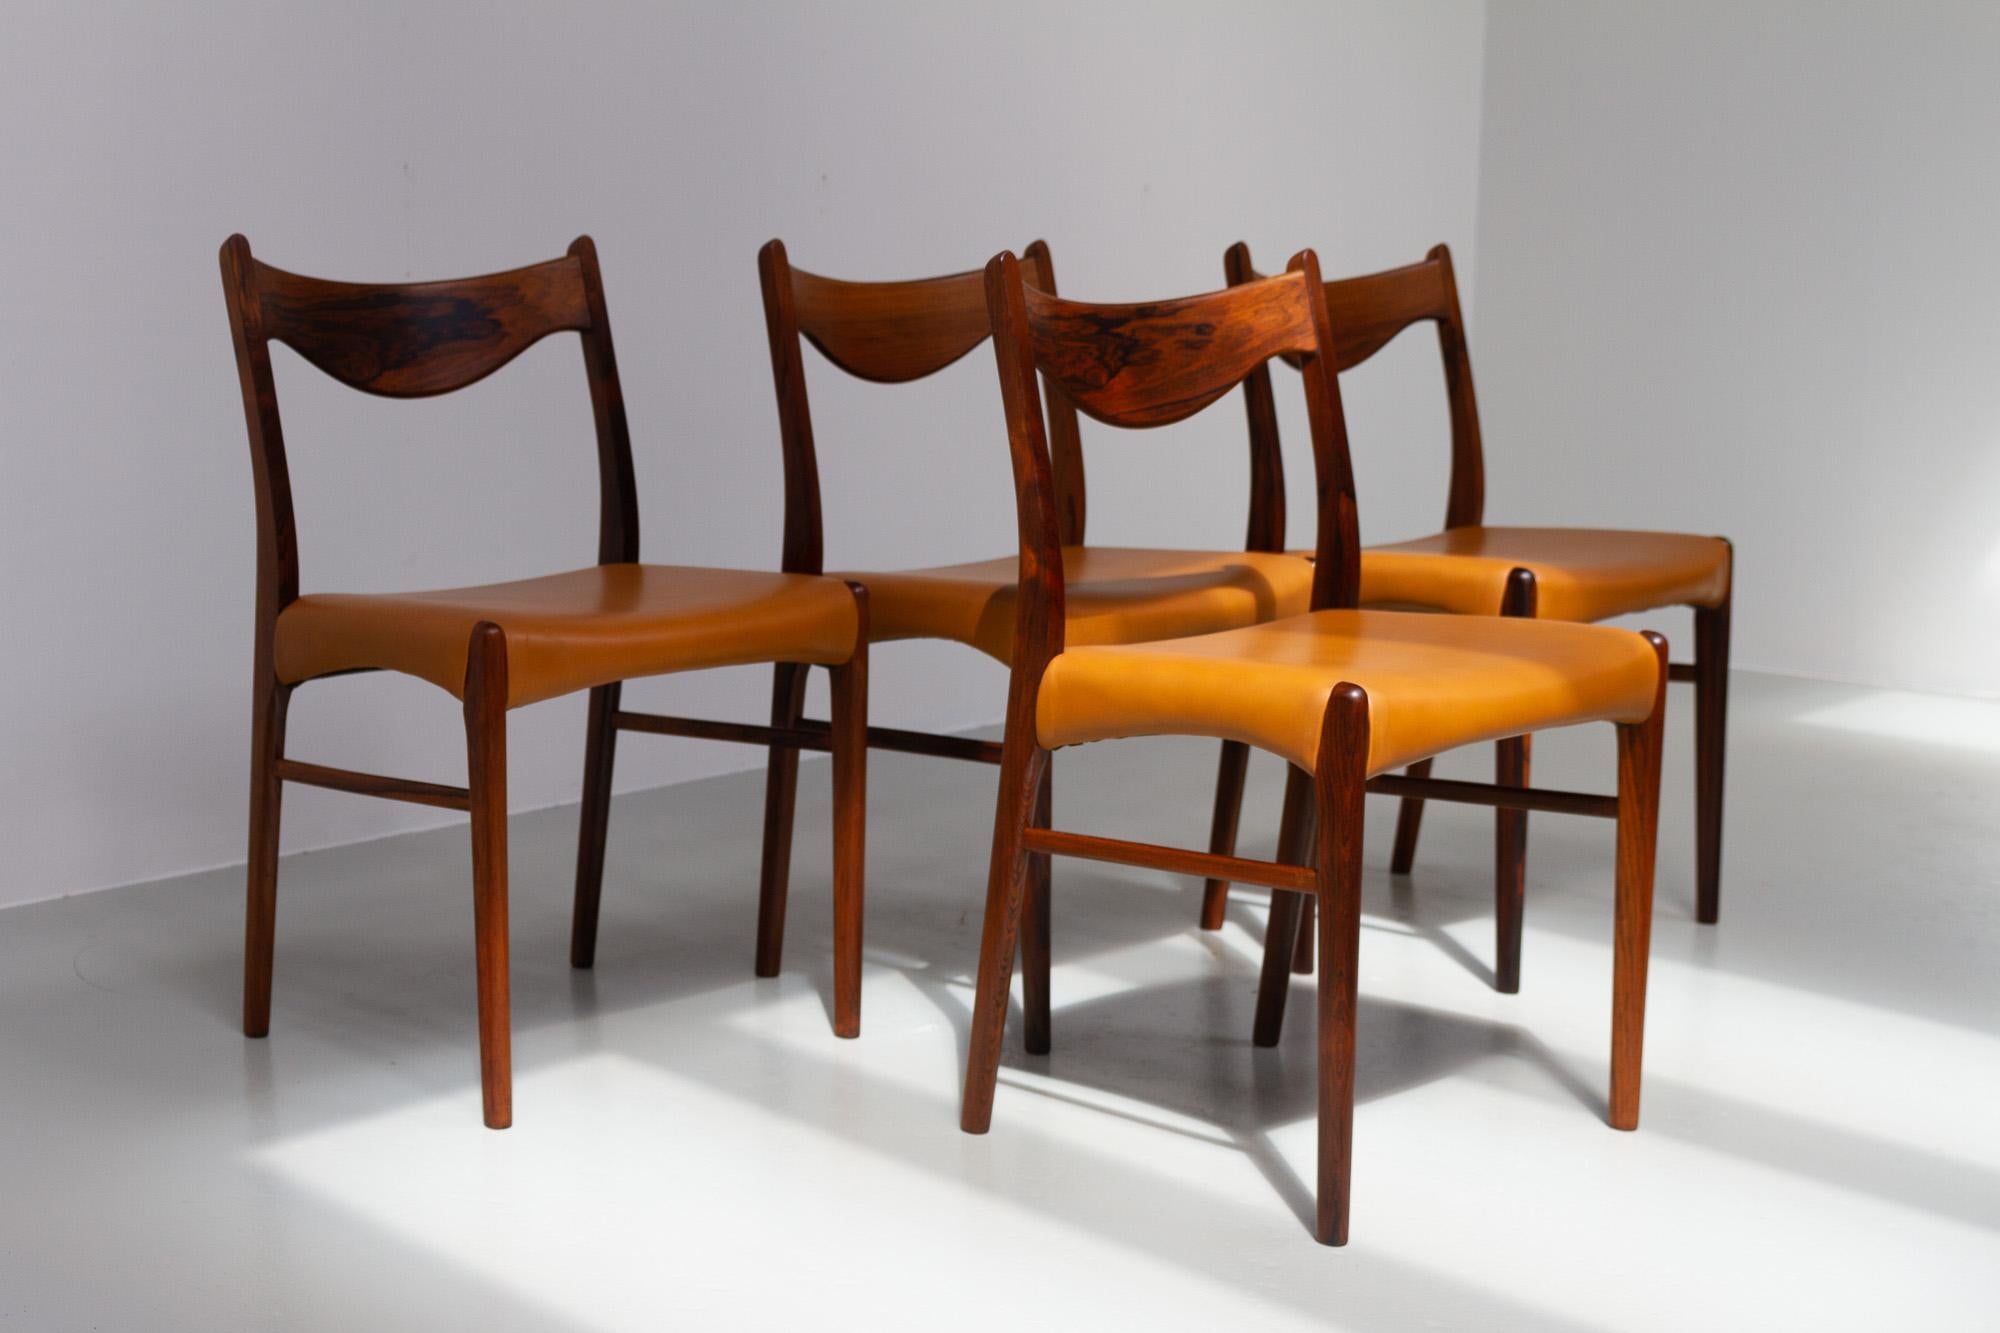 Danish Mid-Century Modern Rosewood/Palisander Dining Room Chairs GS61 by Arne Wahl Iversen for Glyngøre Stolefabrik, 1950s.

Beautiful Scandinavian Modern set of four GS 61 dining chairs designed in 1957 by Danish architect Arne Wahl Iversen for